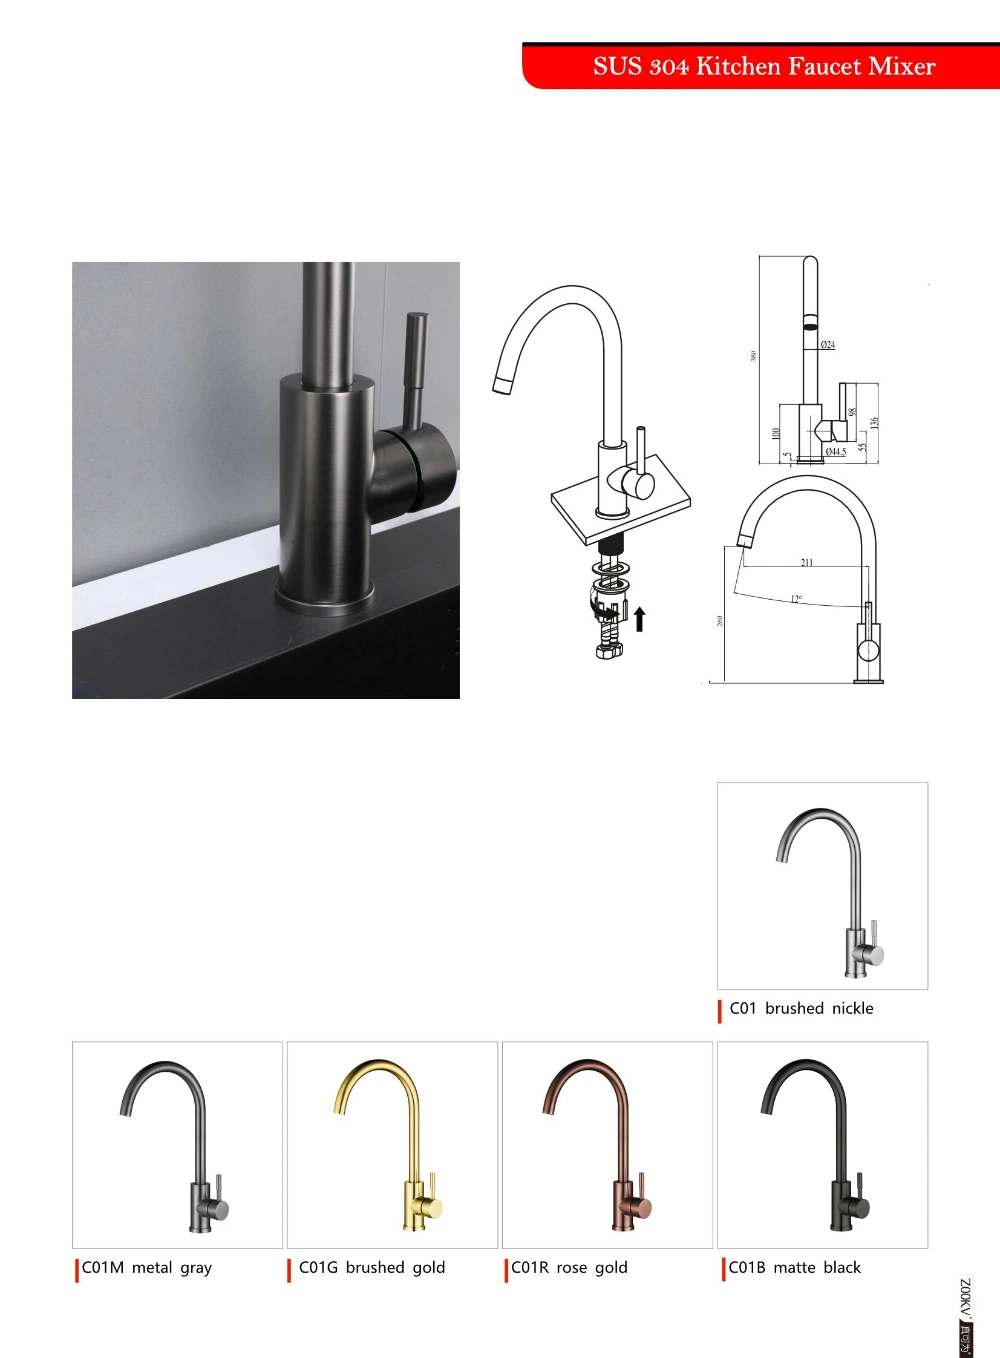 Gold Black Chrome Sanitary Ware Faucet Factory Bathroom Basin Mixer Water Taps Kitchen Sinks Faucet